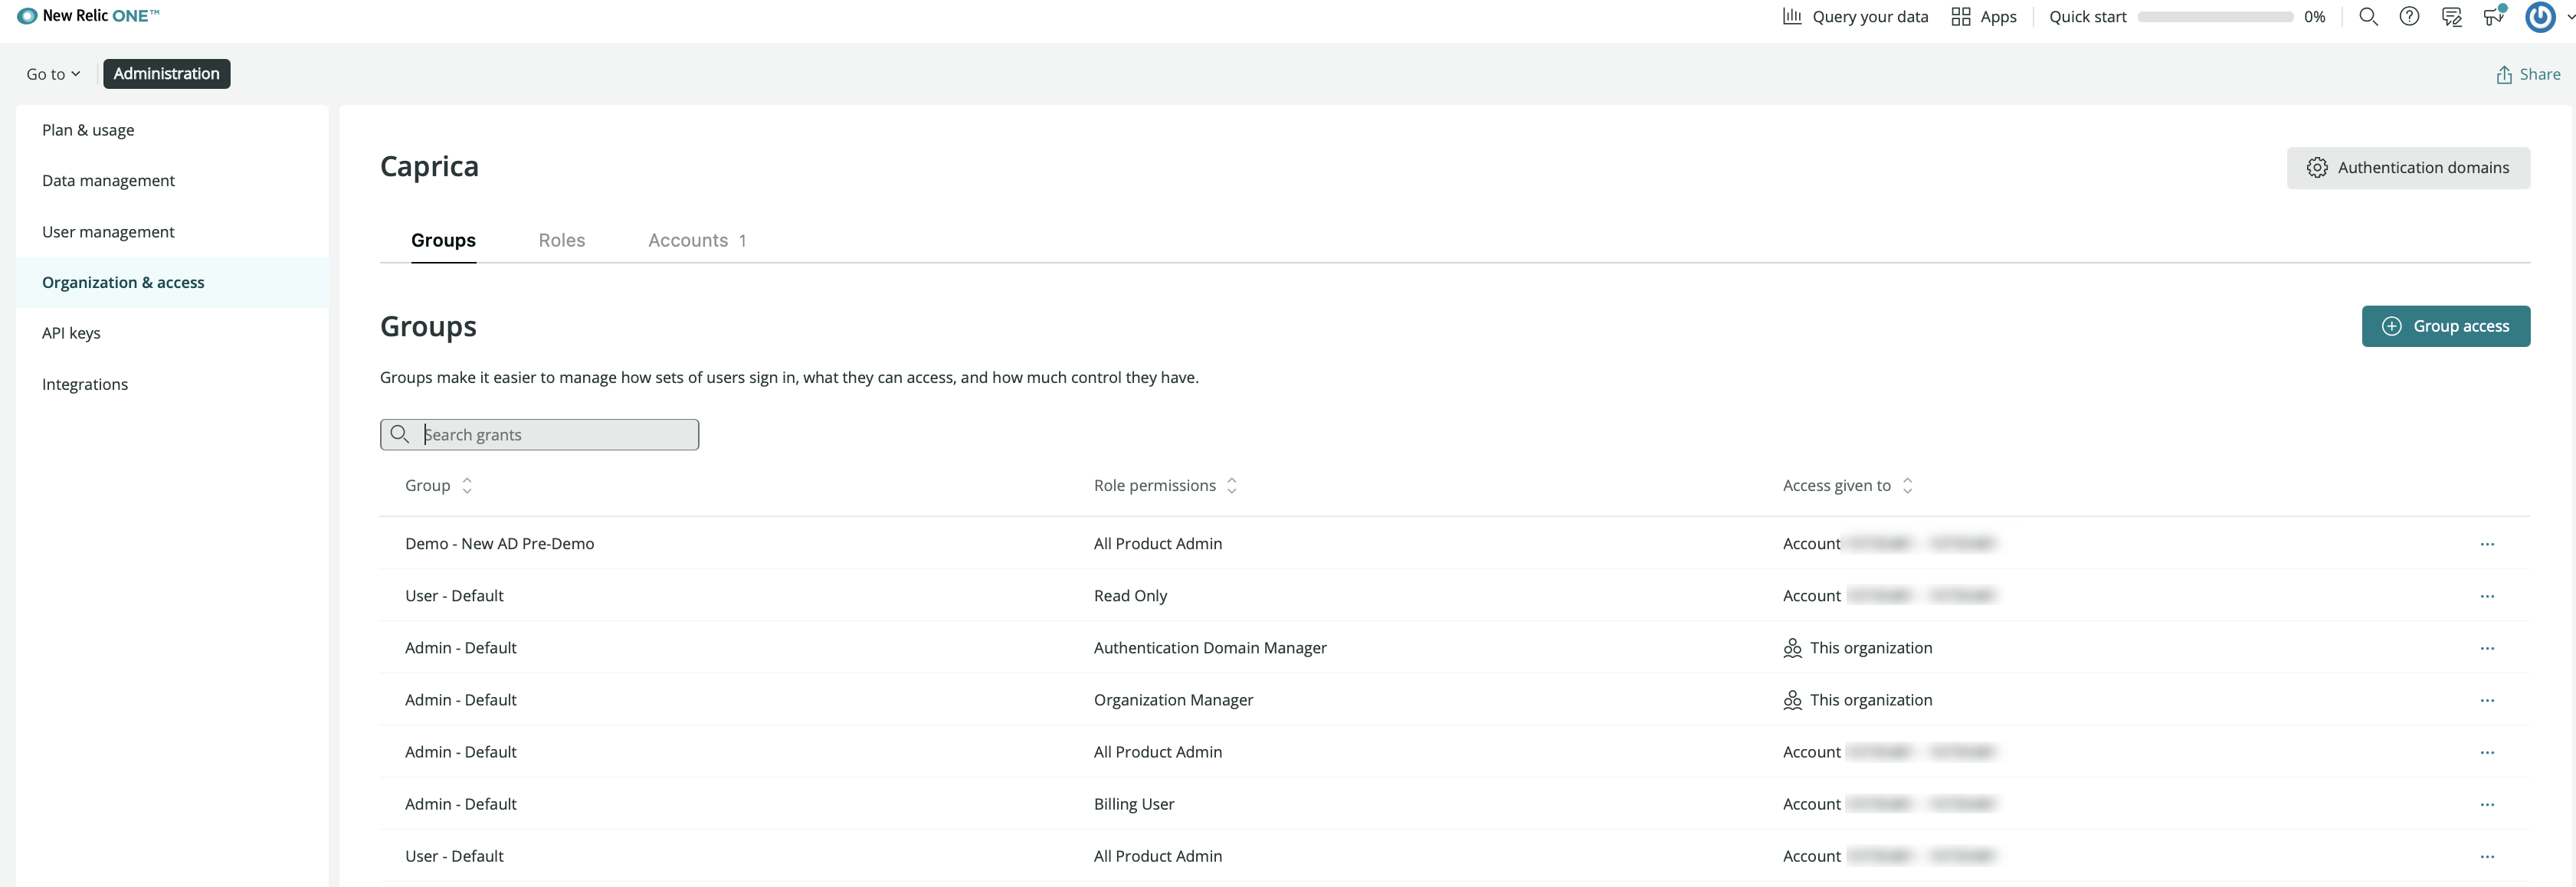 New Relic One organization and access UI